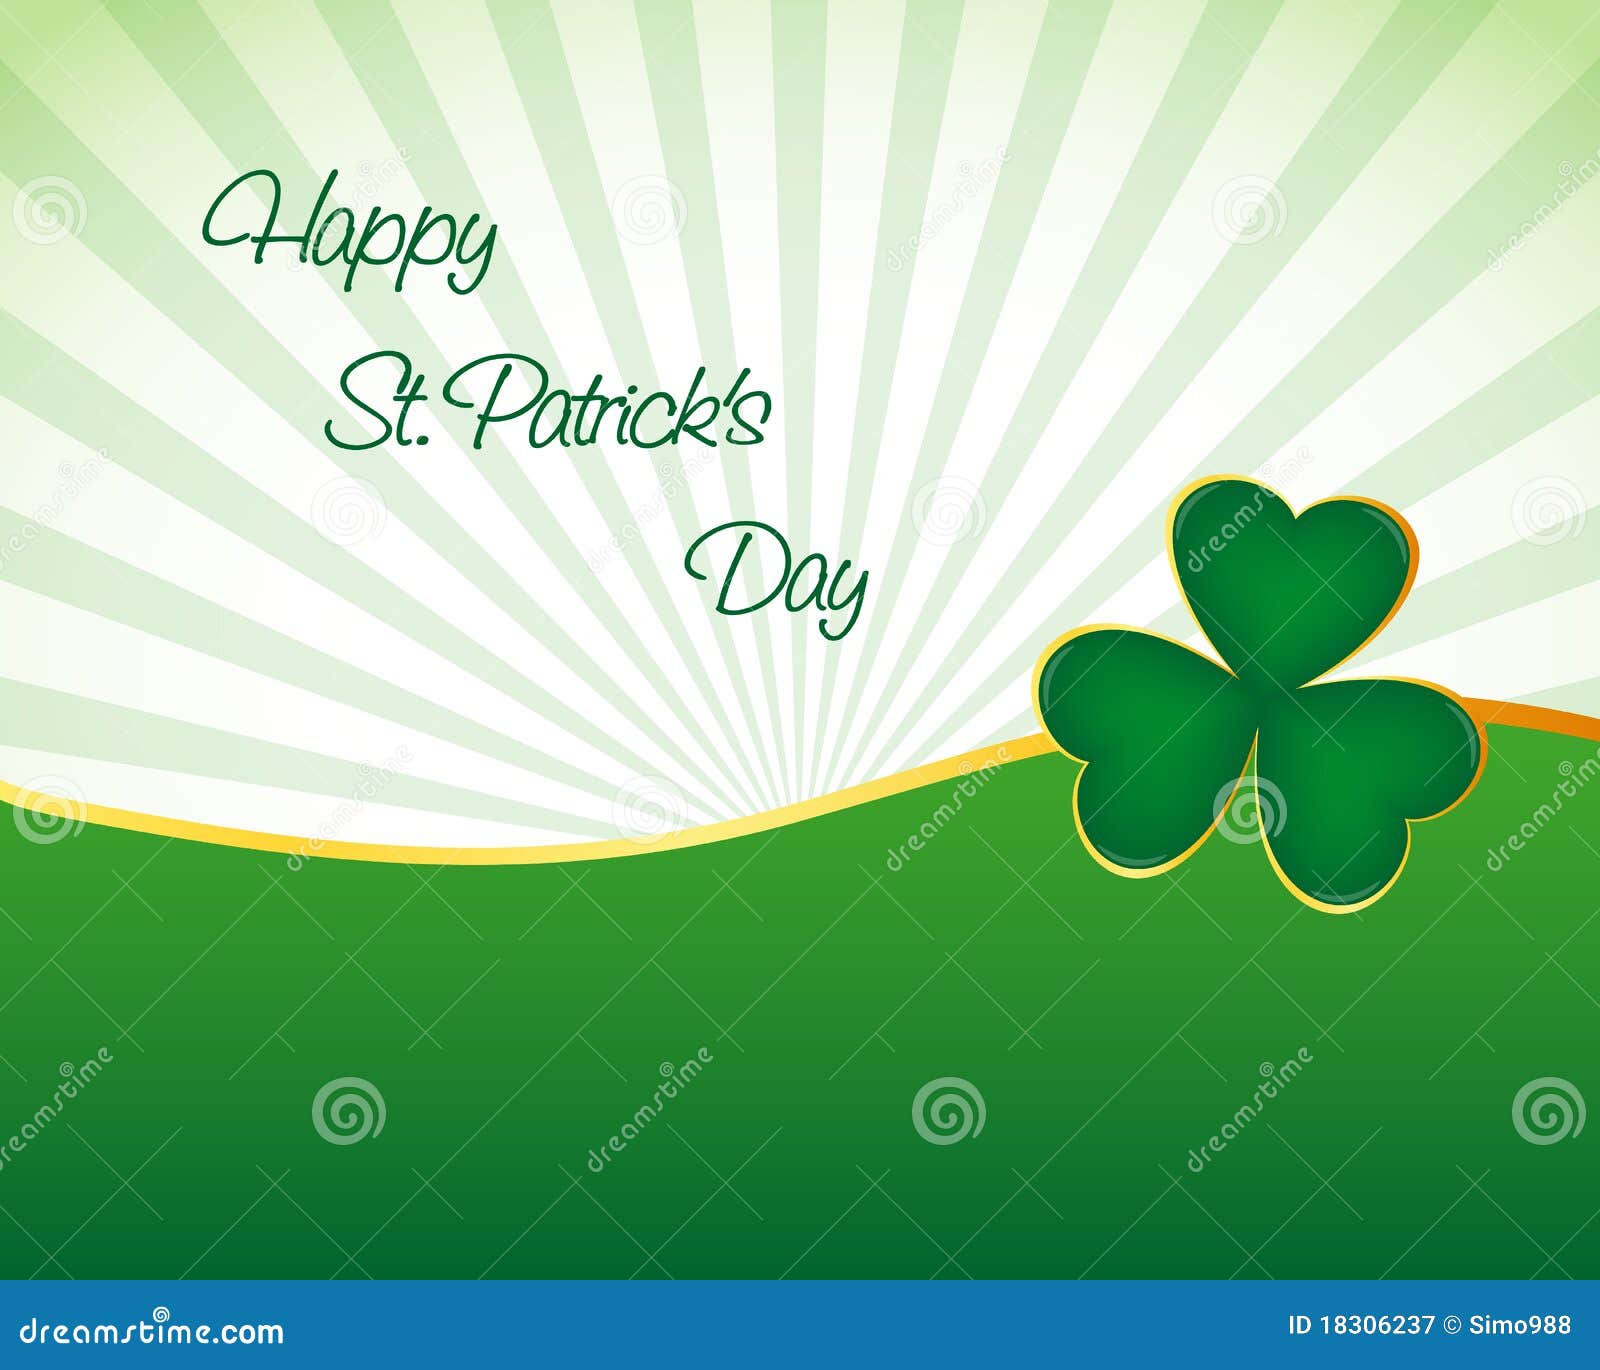 30 St Patrick Day Wallpapers You Can Download Free